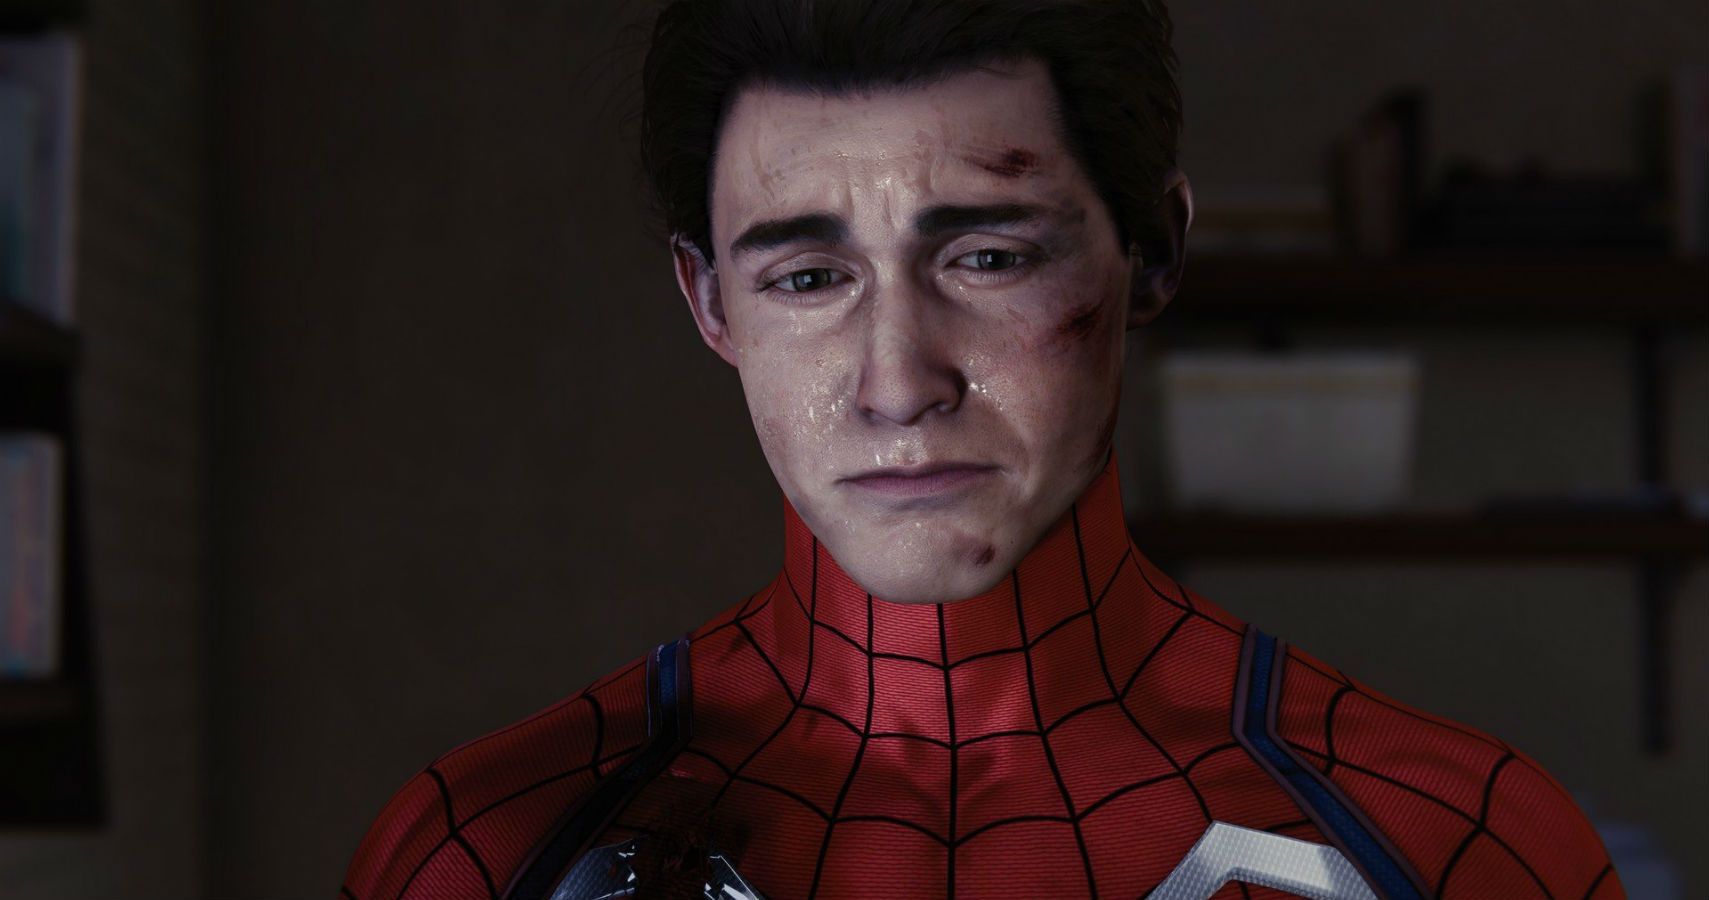 Marvel's Spider-Man Remaster's Peter Parker Takes All The Emotion Out Pivotal Scene